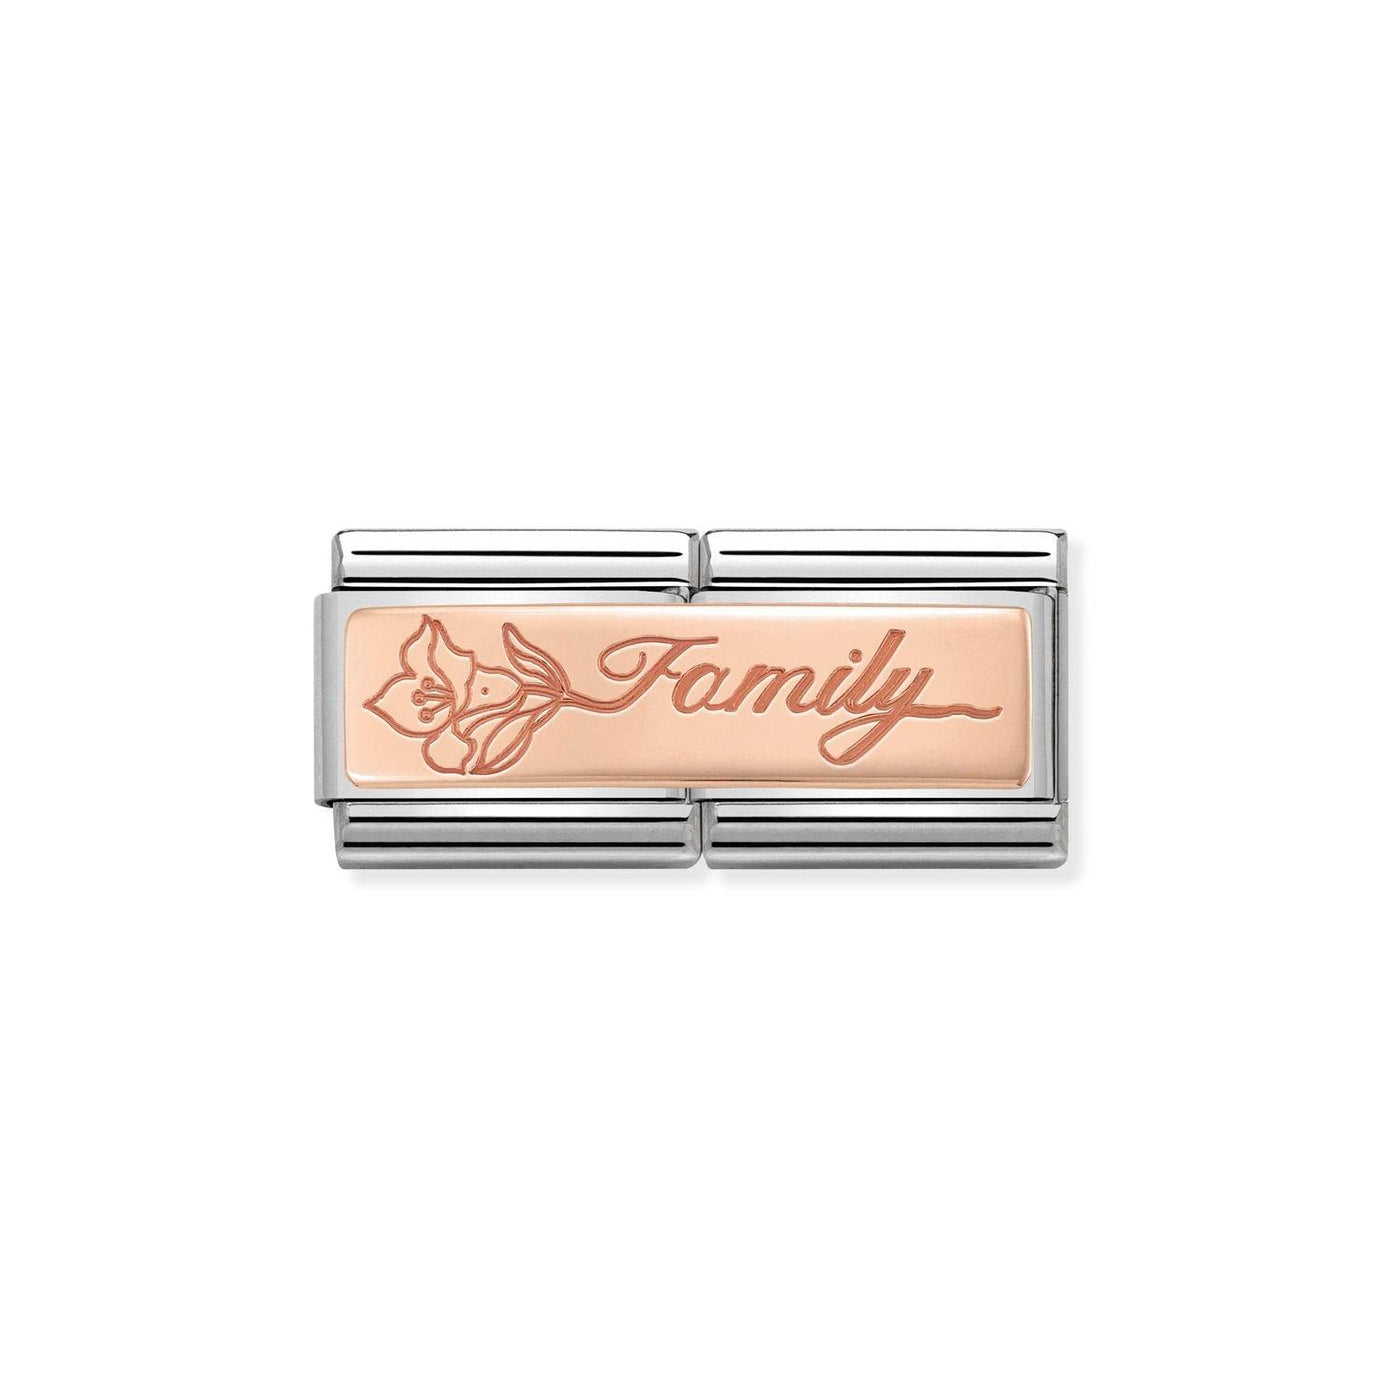 Nomination Classic Family Engraved Double Links Charm - Rococo Jewellery